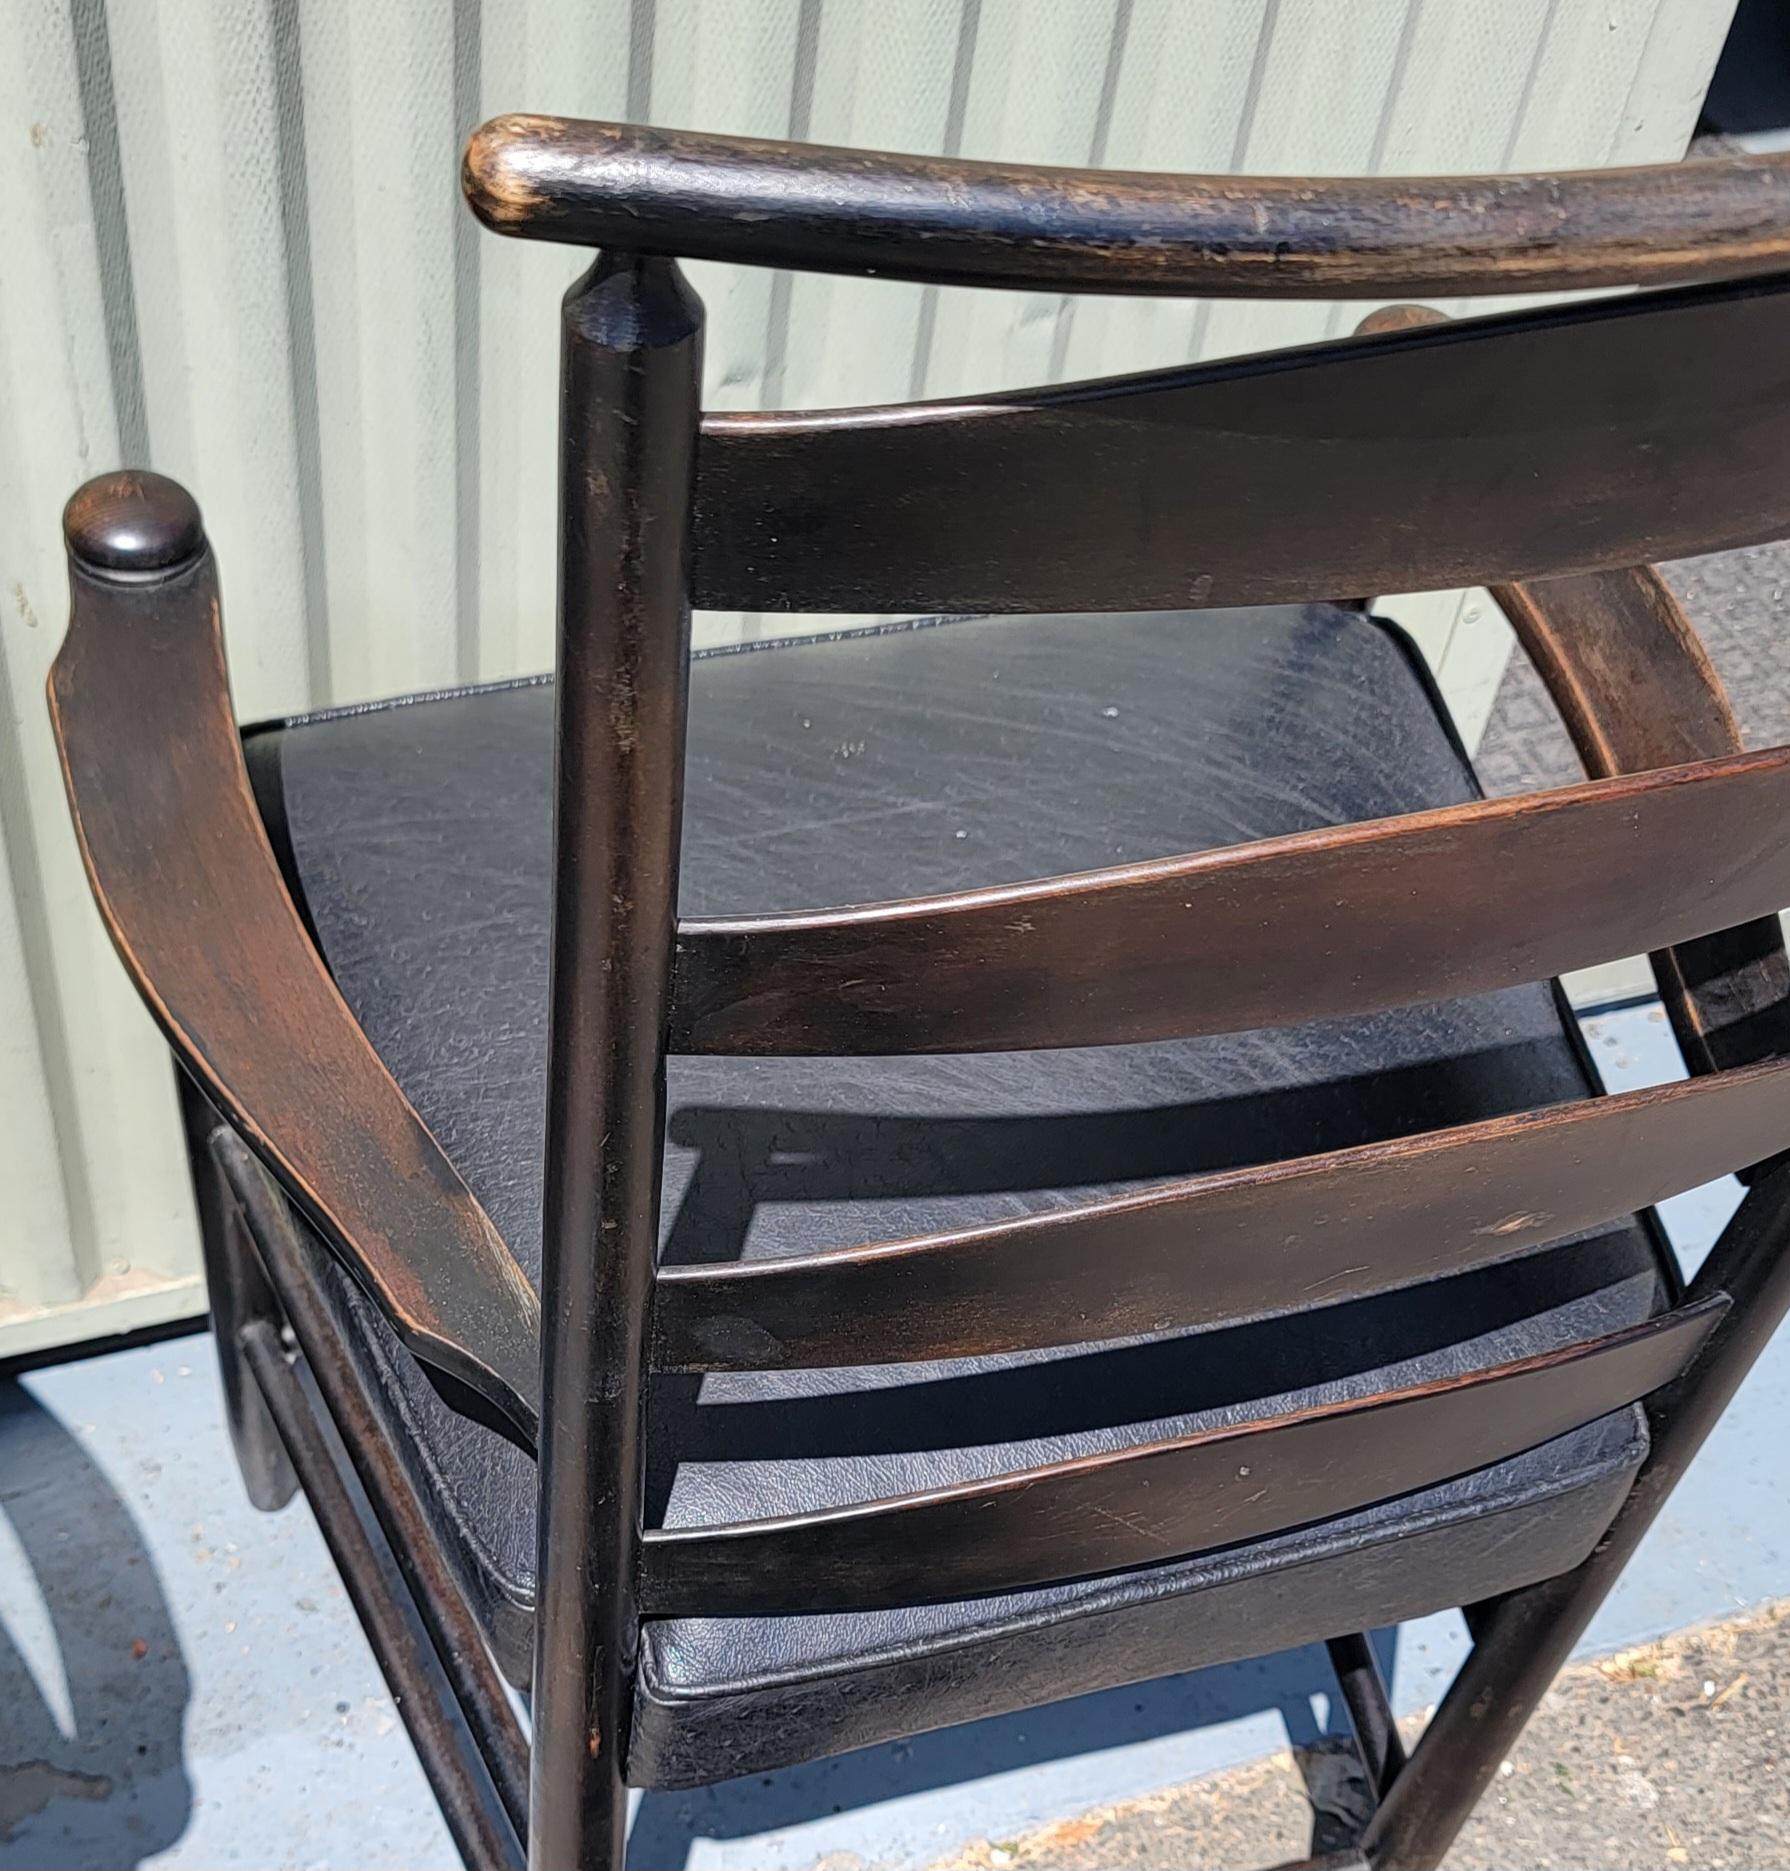 These amazing Shaker style collection of three ladder back chairs are with black leather seats and very comfortable. The chairs are copies from the original Shaker chairs from New England.Two are matching and the third is like a side chair.